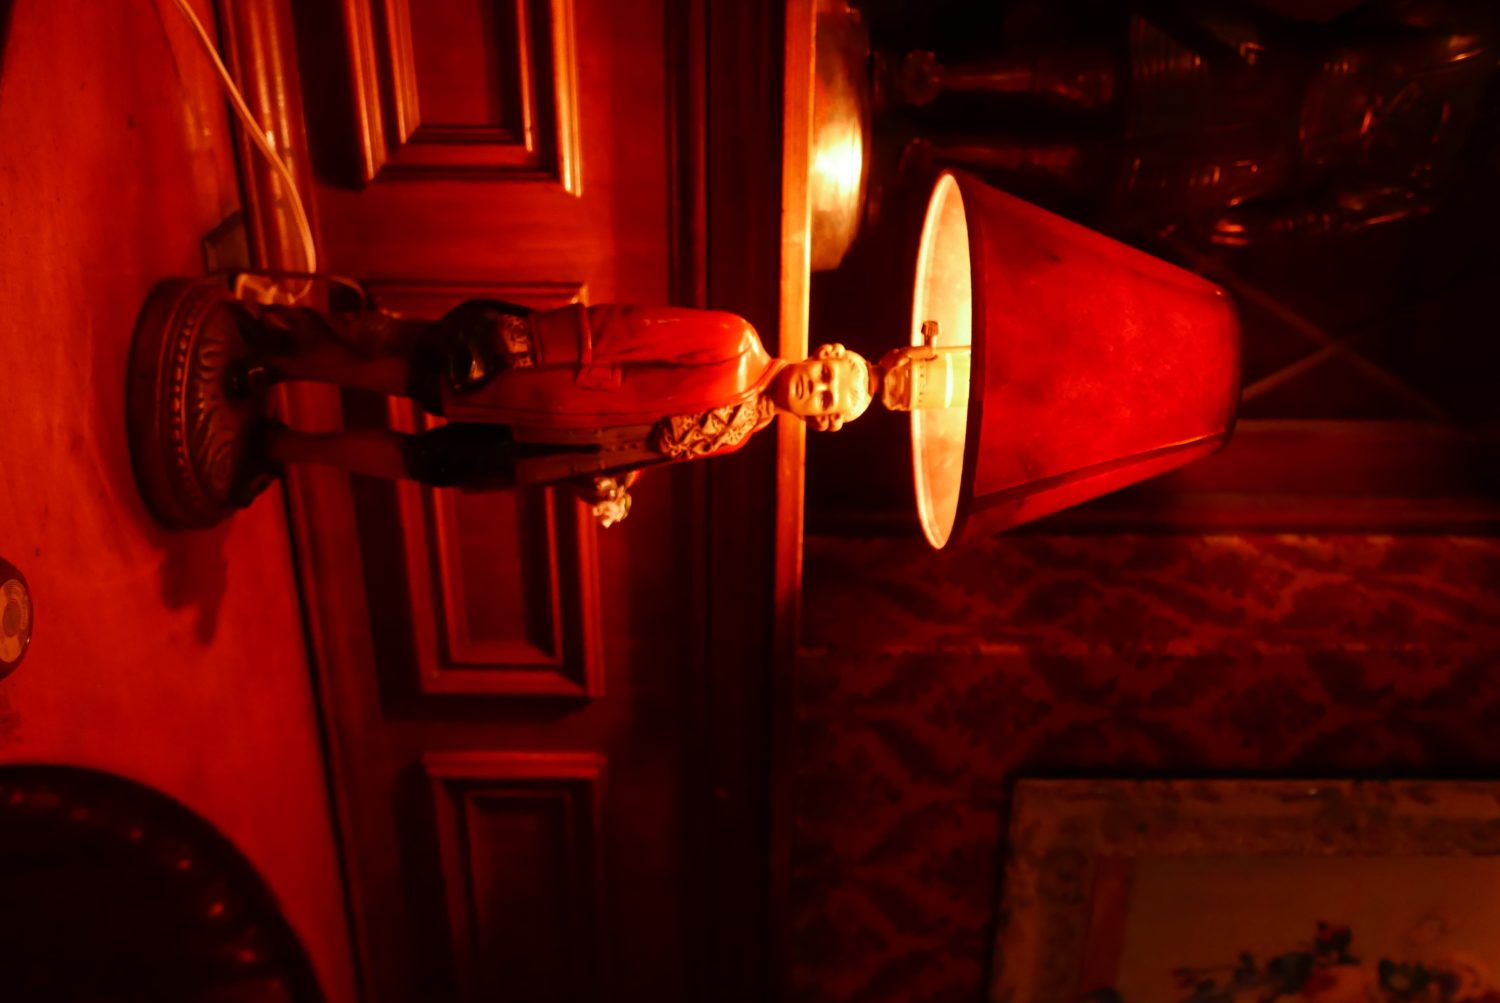 The Prince Bar features a lamp with a statue of a man on it.